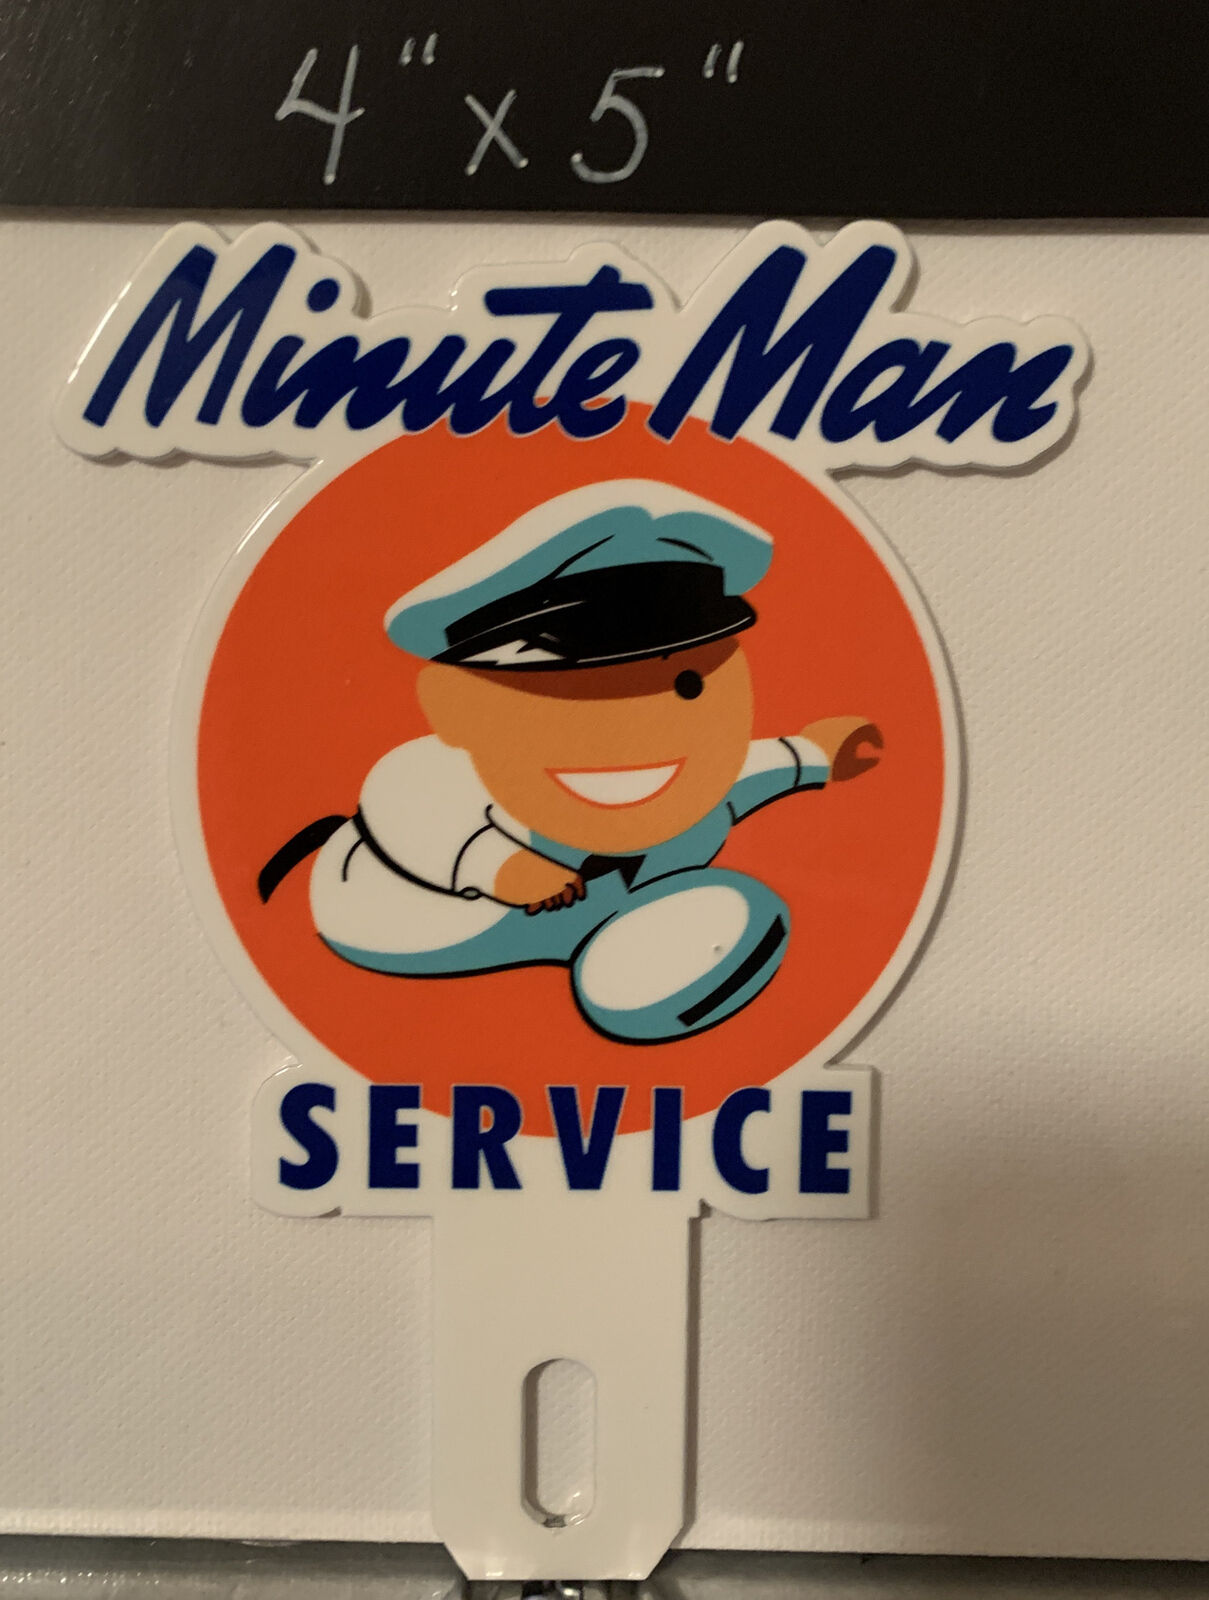 Minute Man Metal Plate Topper Service Station Repairs Auto Truck Sales Gas Oil